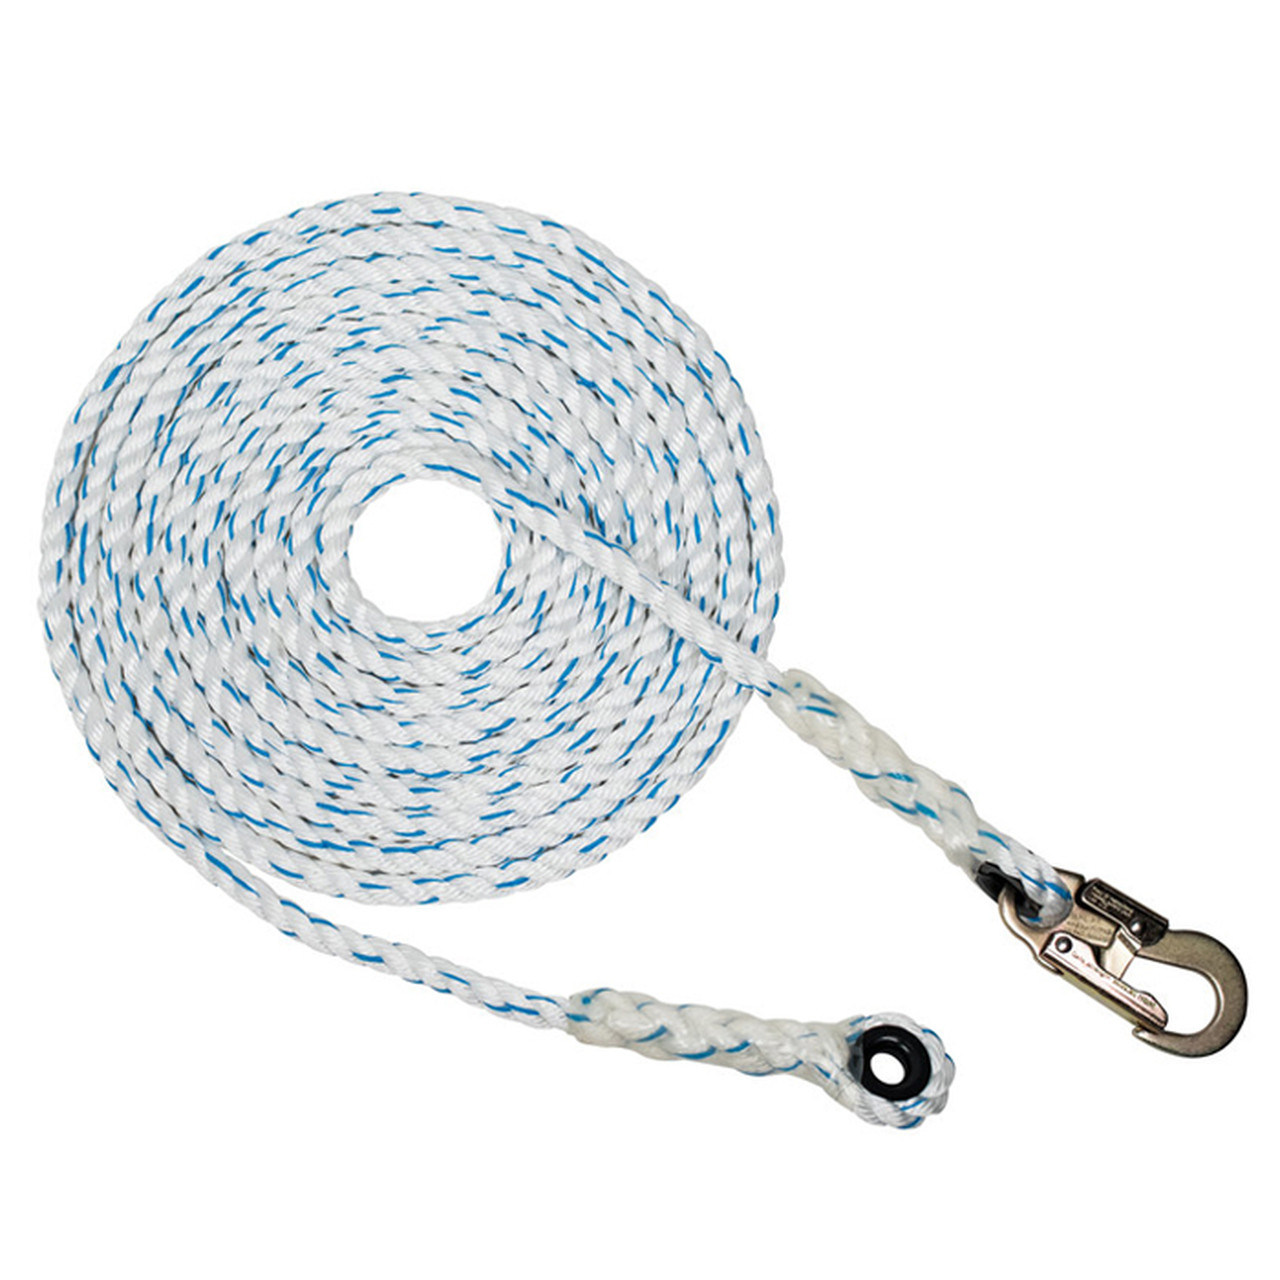 5/8 - 3 Strand Composite Vertical Lifeline - Hook & Thimble by